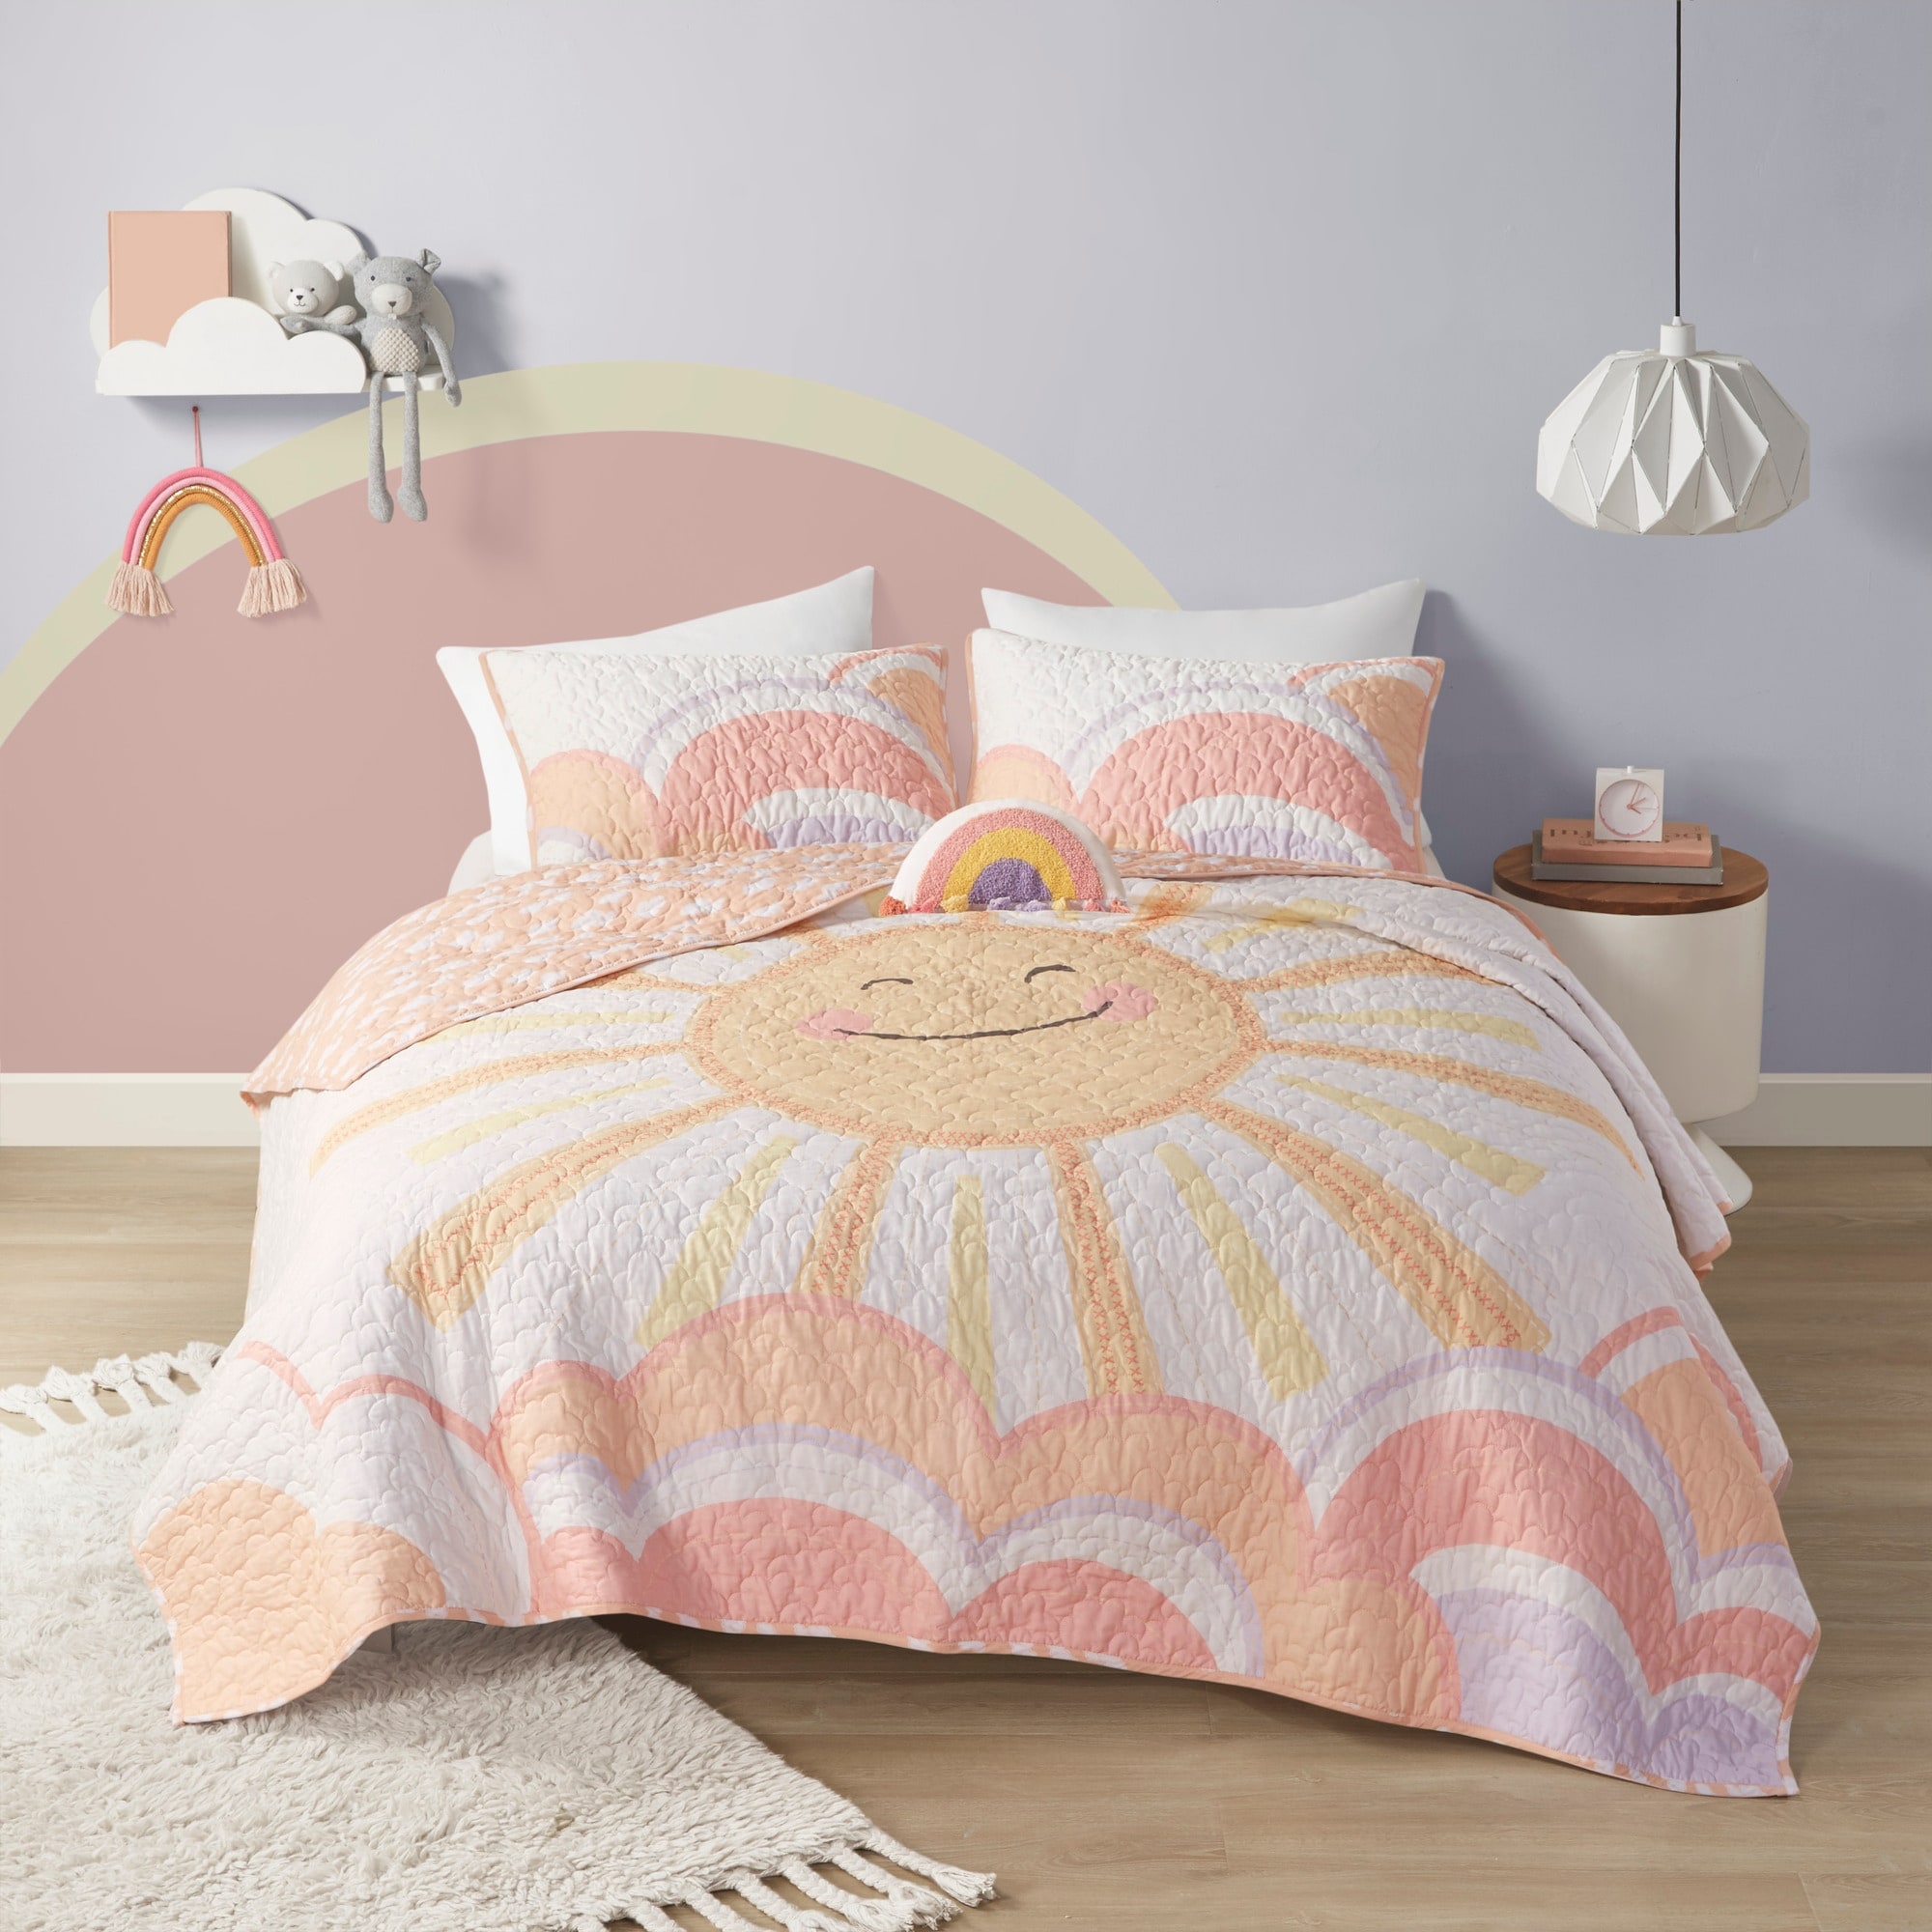 https://ak1.ostkcdn.com/images/products/is/images/direct/fd64c591125d7533f8506a0b62f51244ff8ff2bf/Urban-Habitat-Kids-Ellie-Yellow--Coral-Sunshine-Printed-Reversible-Coverlet-Set.jpg